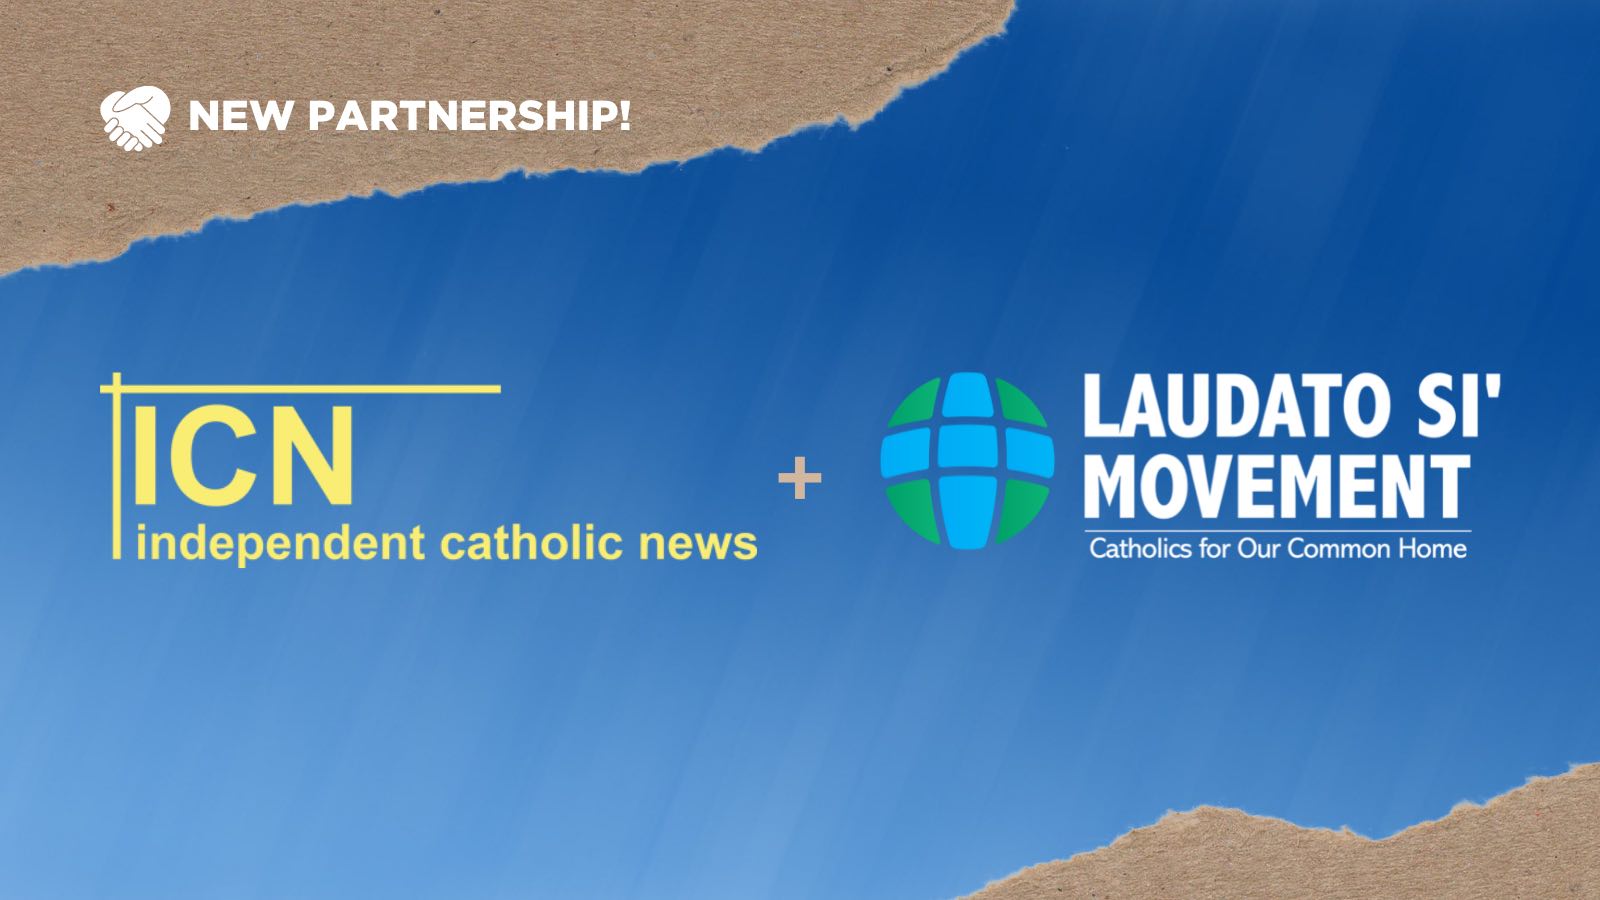 Independent Catholic News and Laudato Si' Movement form a media partnership